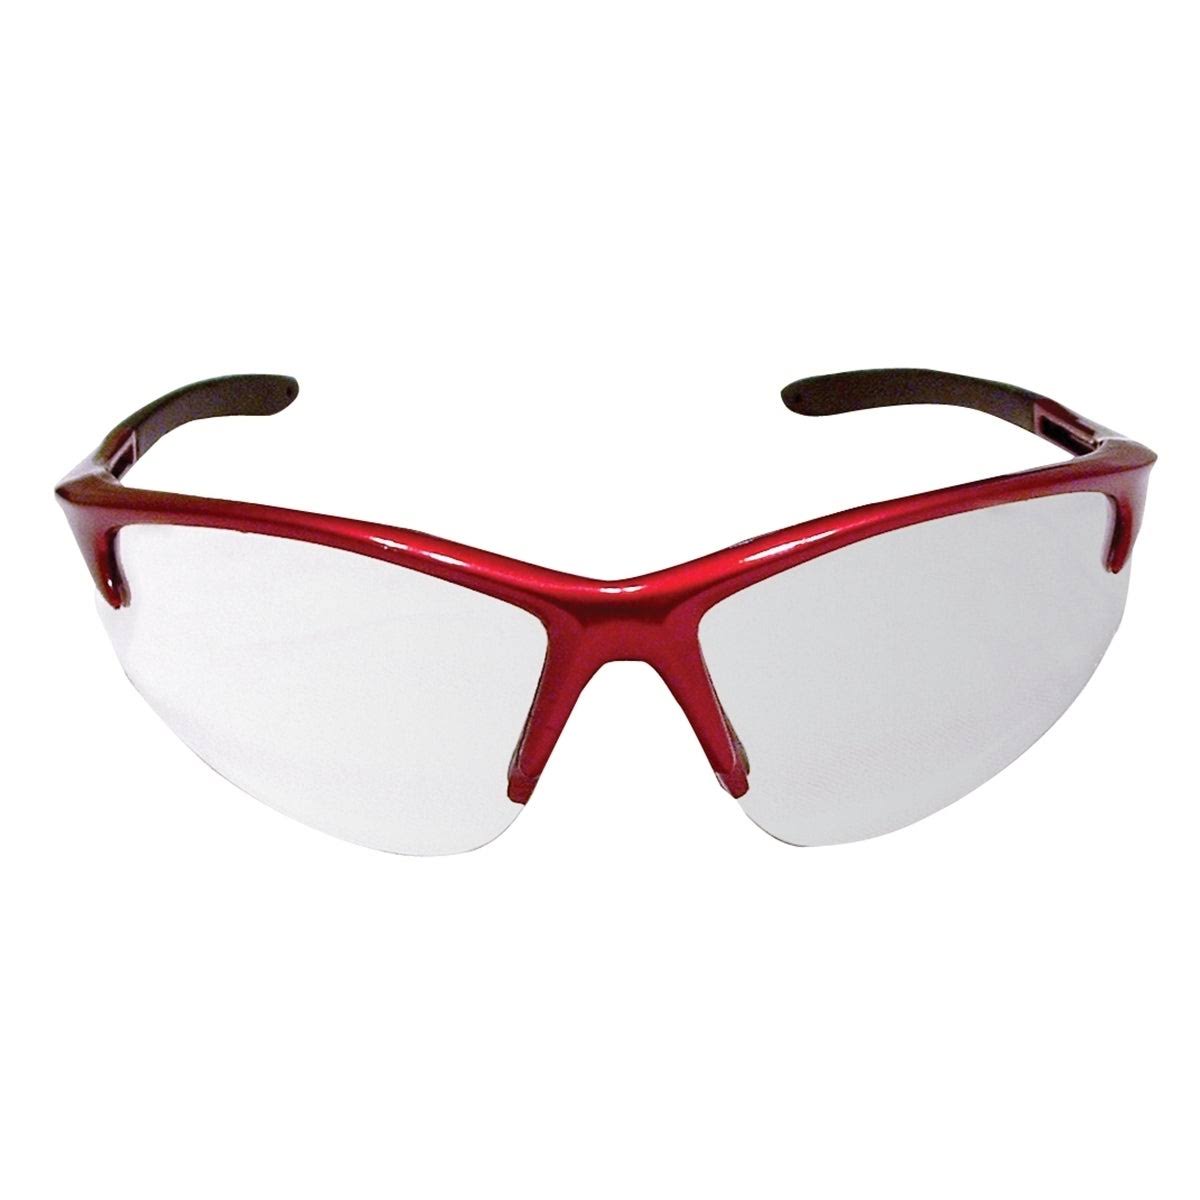 SAS Safety 540-0403 DB2 Safety Glasses with Mirror Lens and Red Frame in Polybag